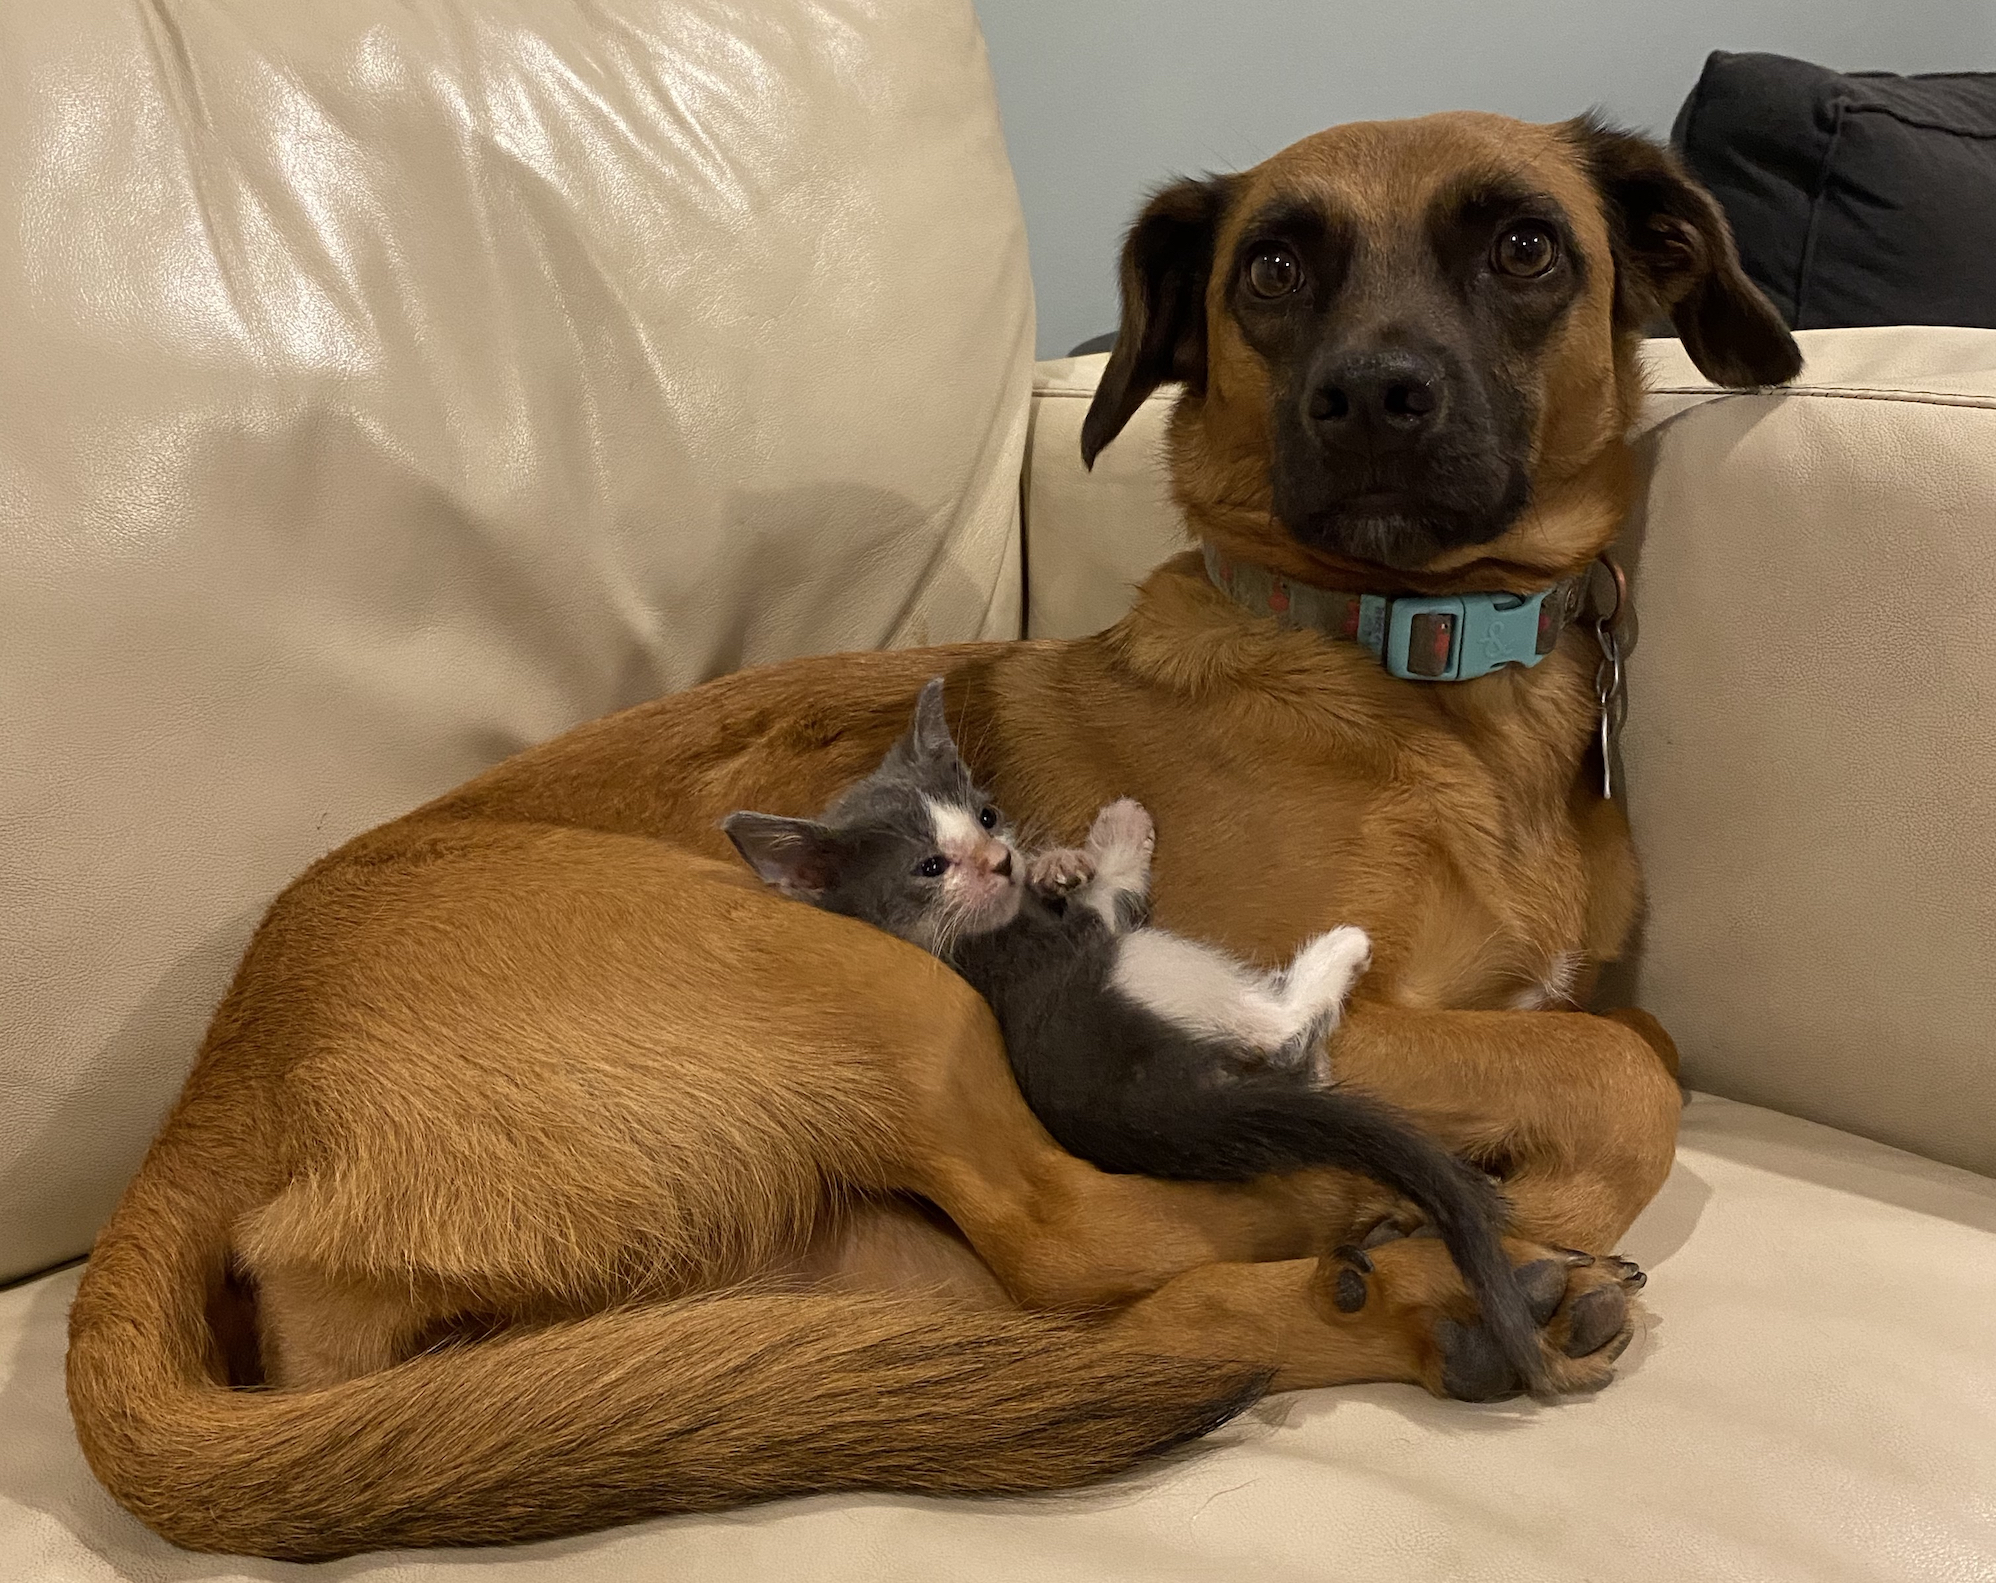 A dog sitting on a couch, with a kitten nuzzled in its lap. 